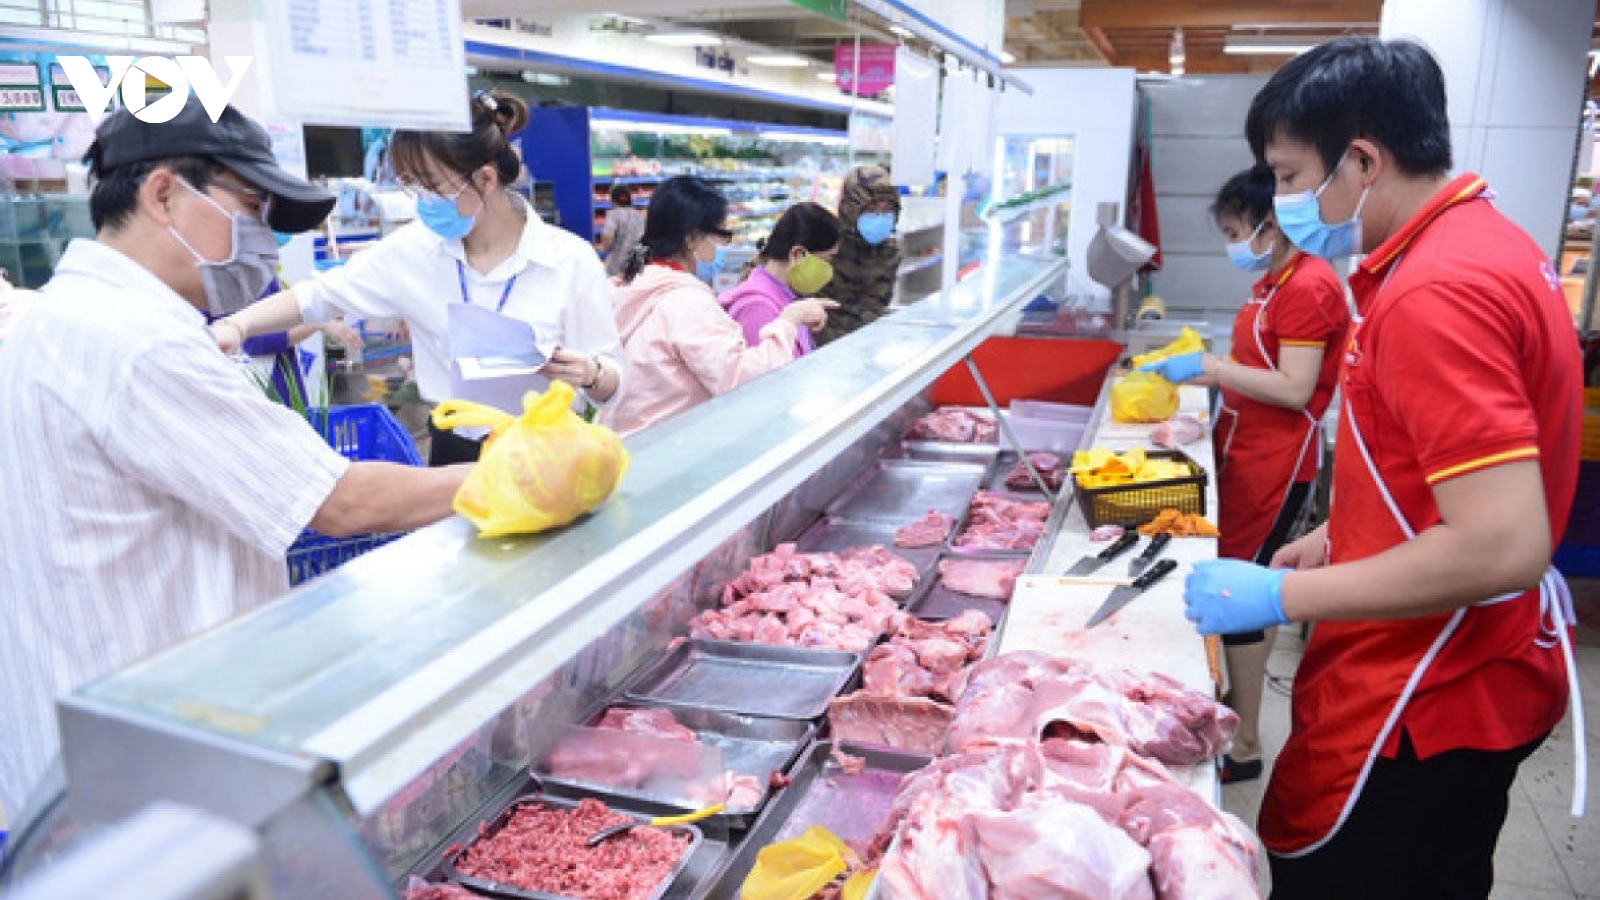 Major Vietnamese firms invest significant capital in raising pigs